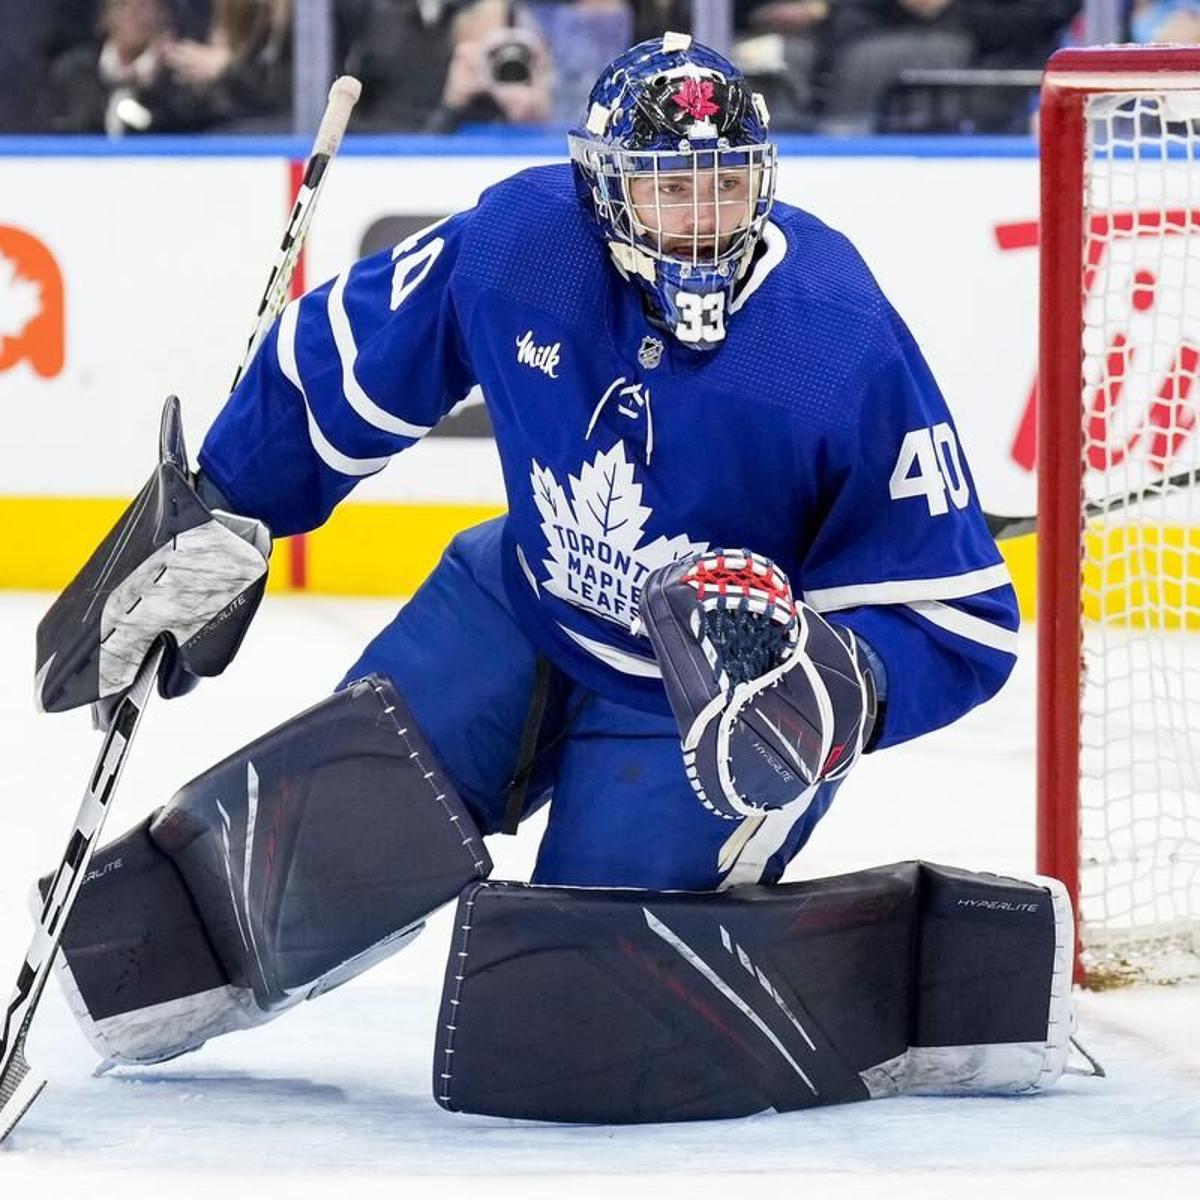 Matthew Knies gives Leafs playoff bonus with sudden impact